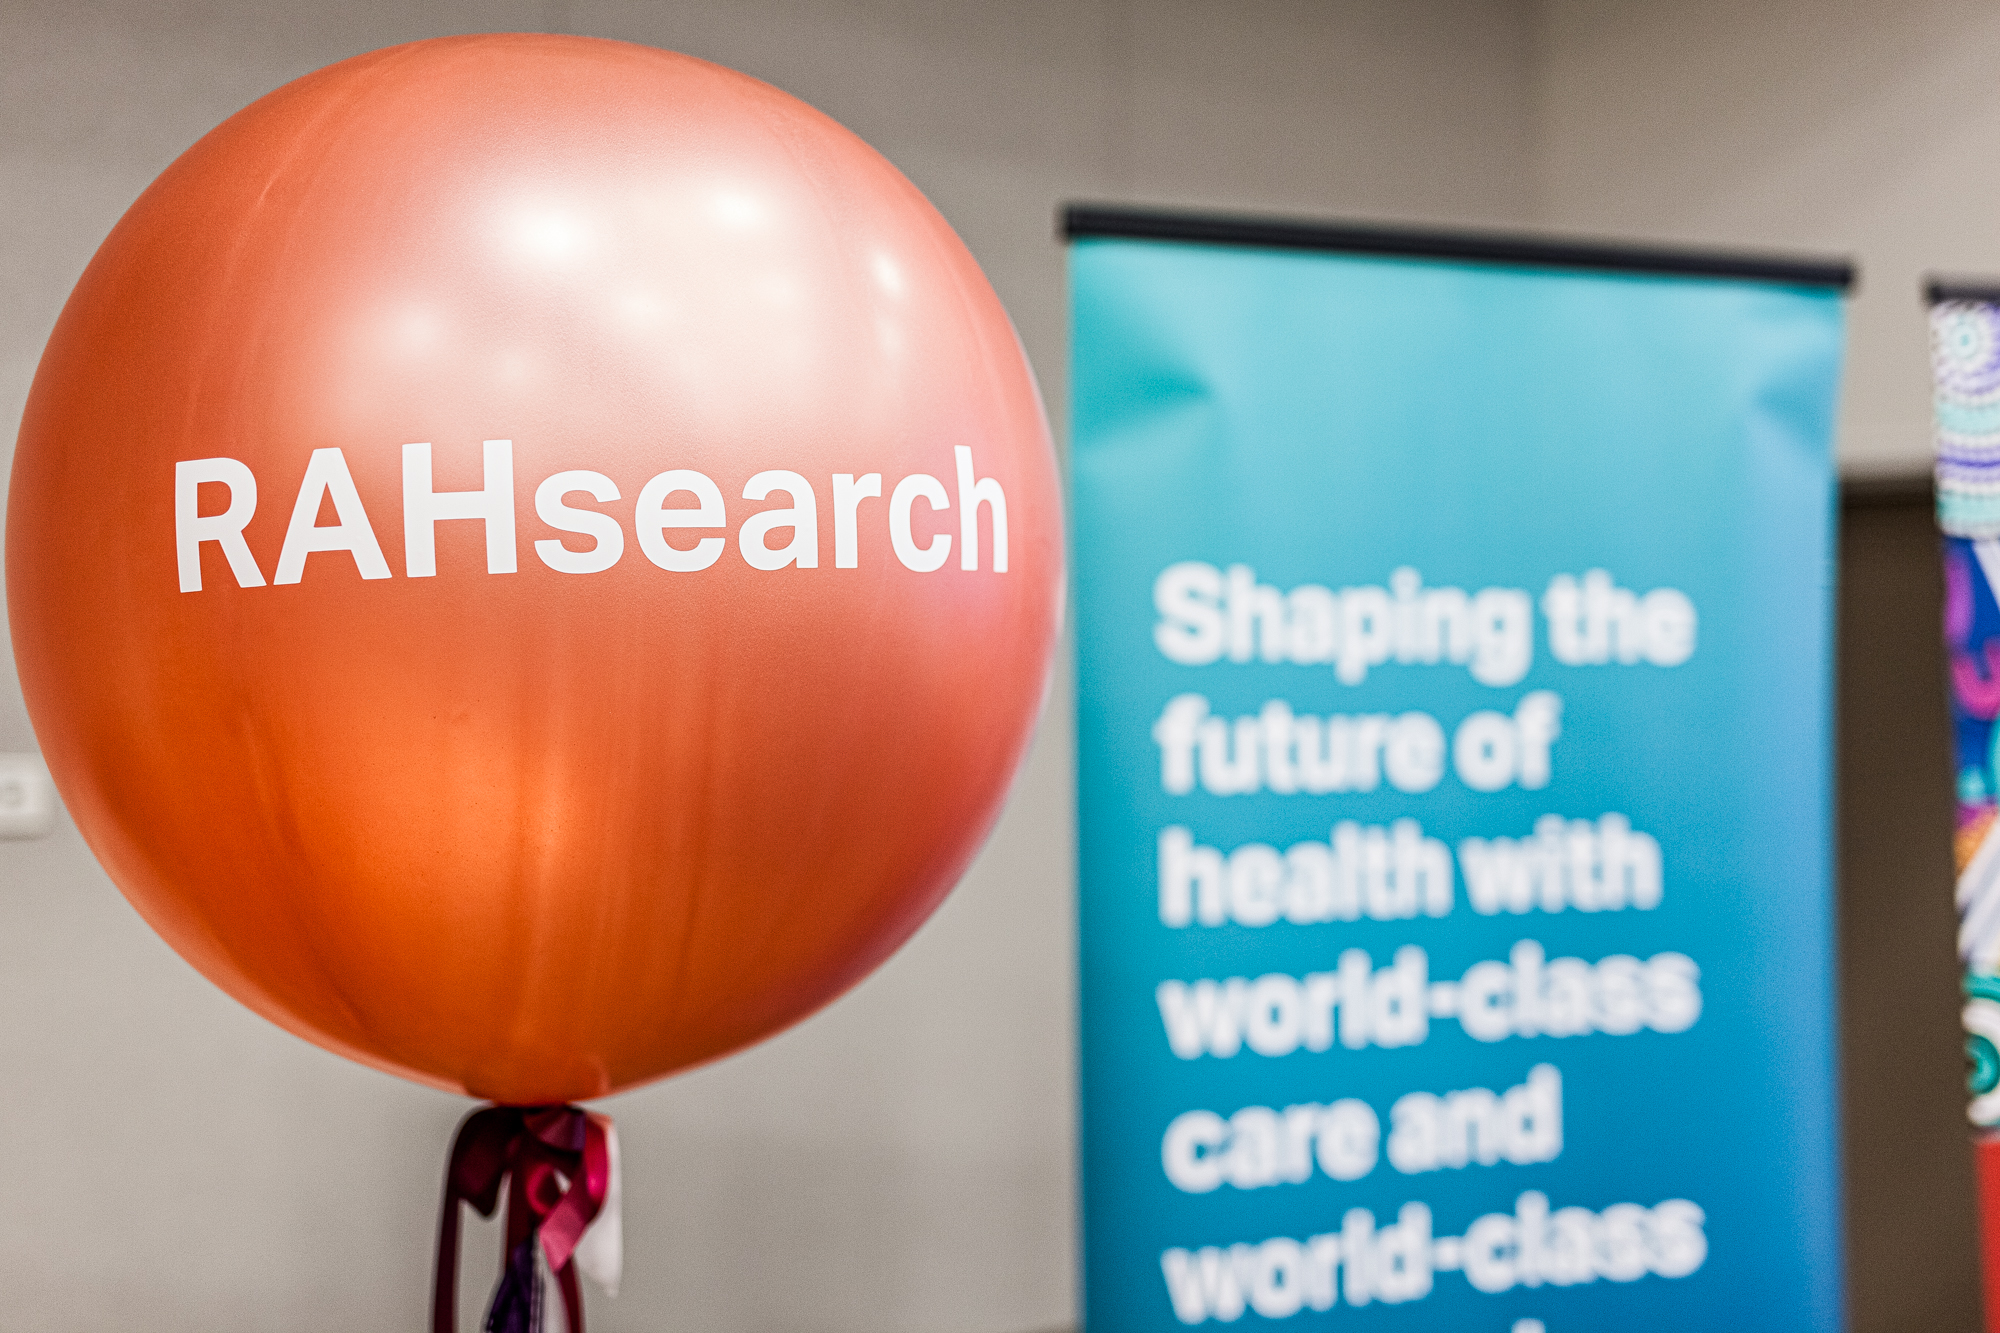 Innovative hospital-based research projects share $600,000 to support world-class patient care